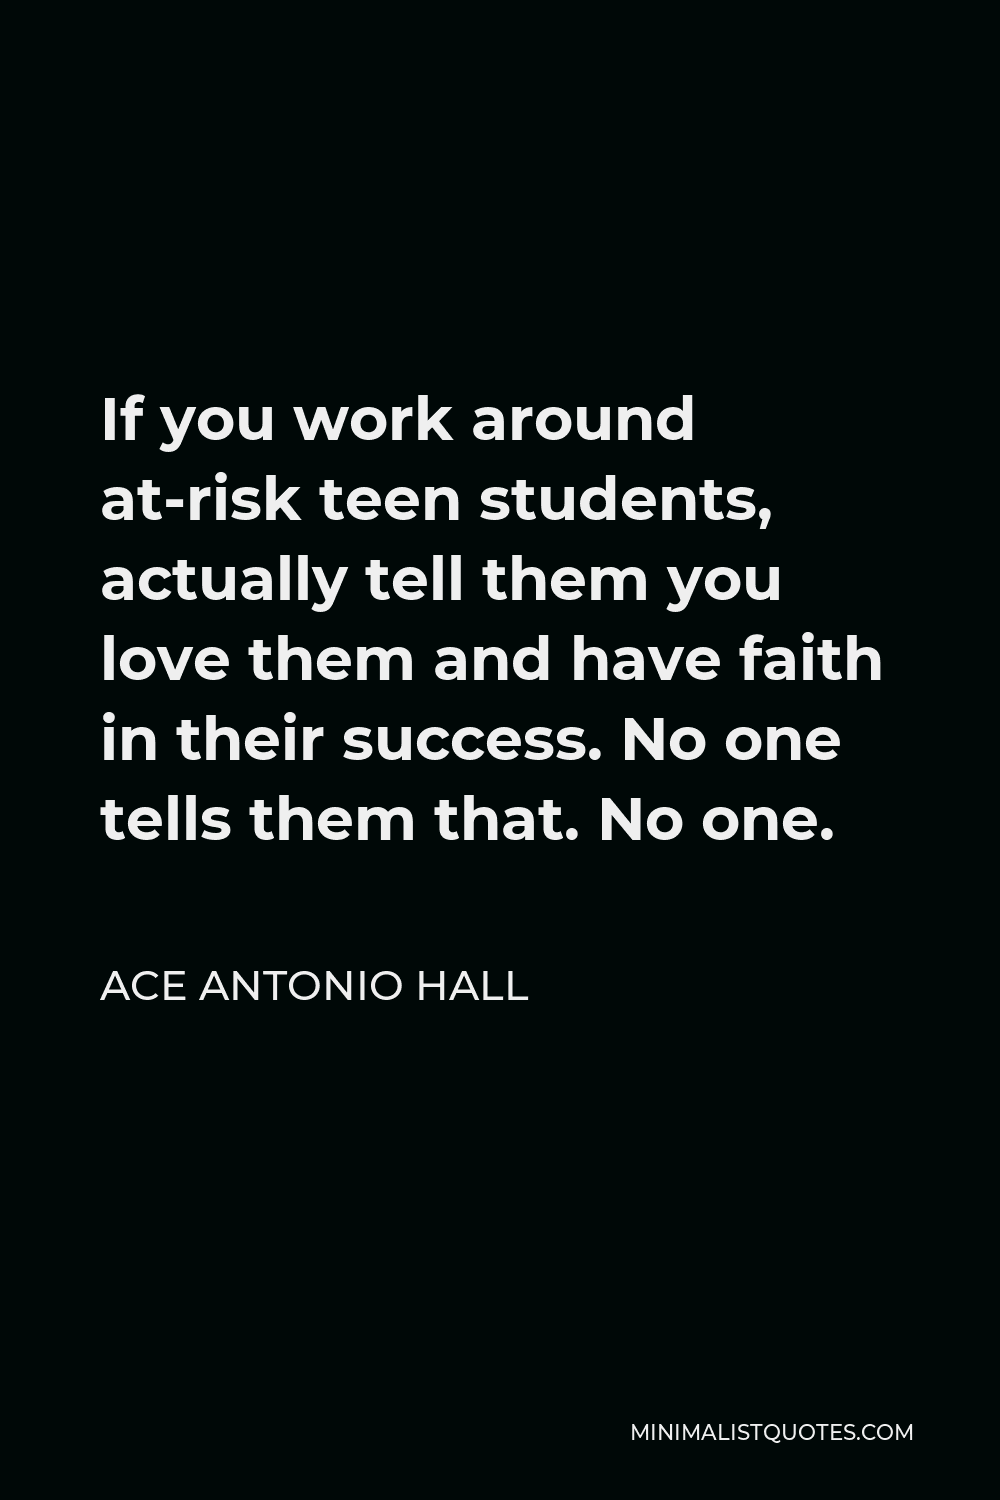 Ace Antonio Hall Quote - If you work around at-risk teen students, actually tell them you love them and have faith in their success. No one tells them that. No one.